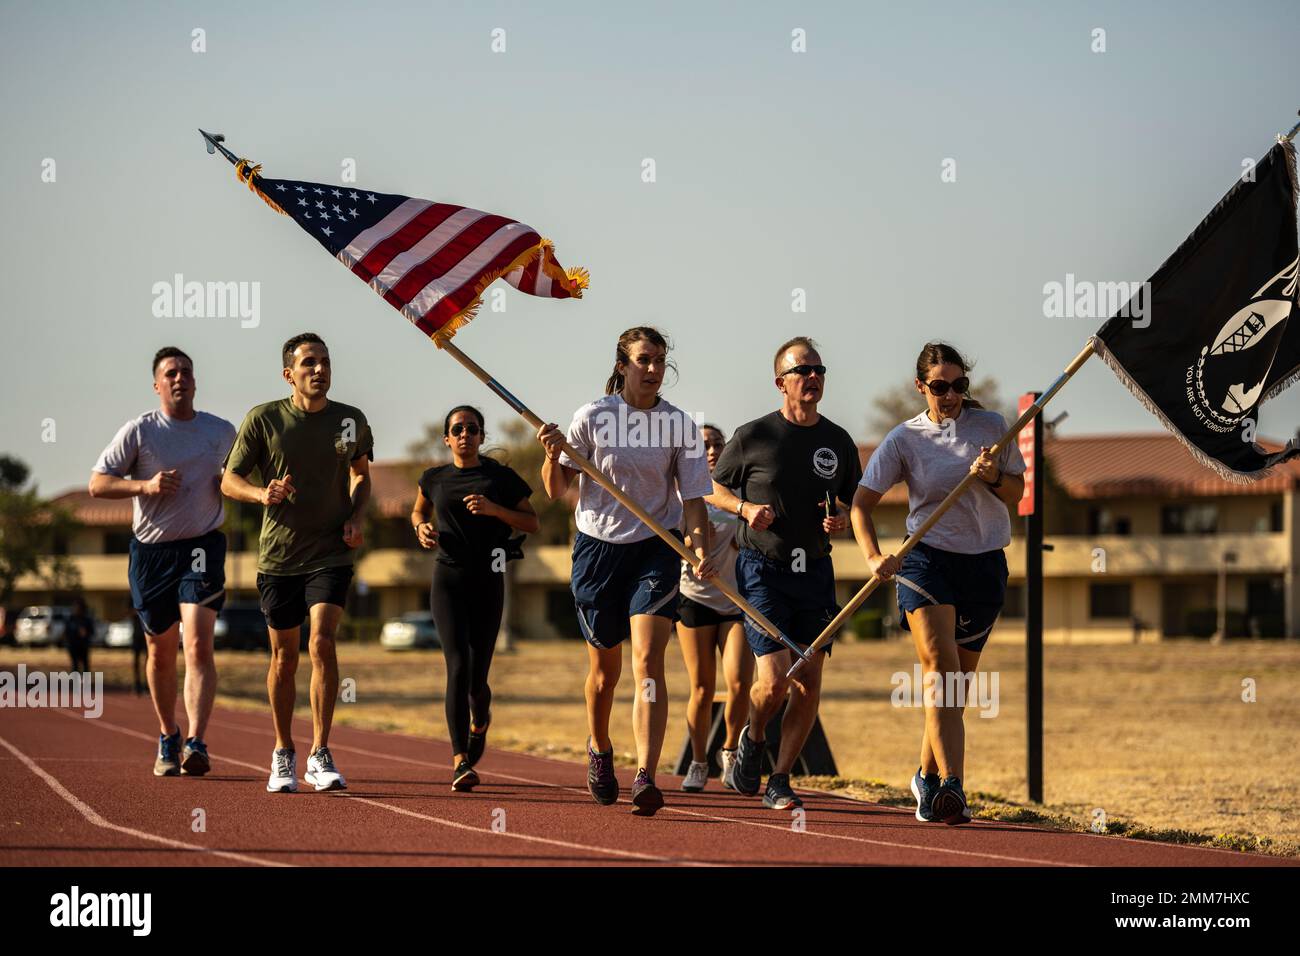 U.S. Airmen honor the legacy of Prisoners of War and Missing in Action service members from various conflicts during the annual 24-hour POW/MIA Remembrance Run at Travis Air Force Base, California, Sept. 15, 2022. Service members, civilians and family members kept the American flag and POW/MIA flag in constant motion for a 24-hour period. According to the Defense POW/MIA Accounting Agency, more than 82,000 Americans remain missing from World War II, the Korean War, the Vietnam War, the Cold War, the Gulf Wars and other conflicts. The names of unaccounted service members were recited during the Stock Photo